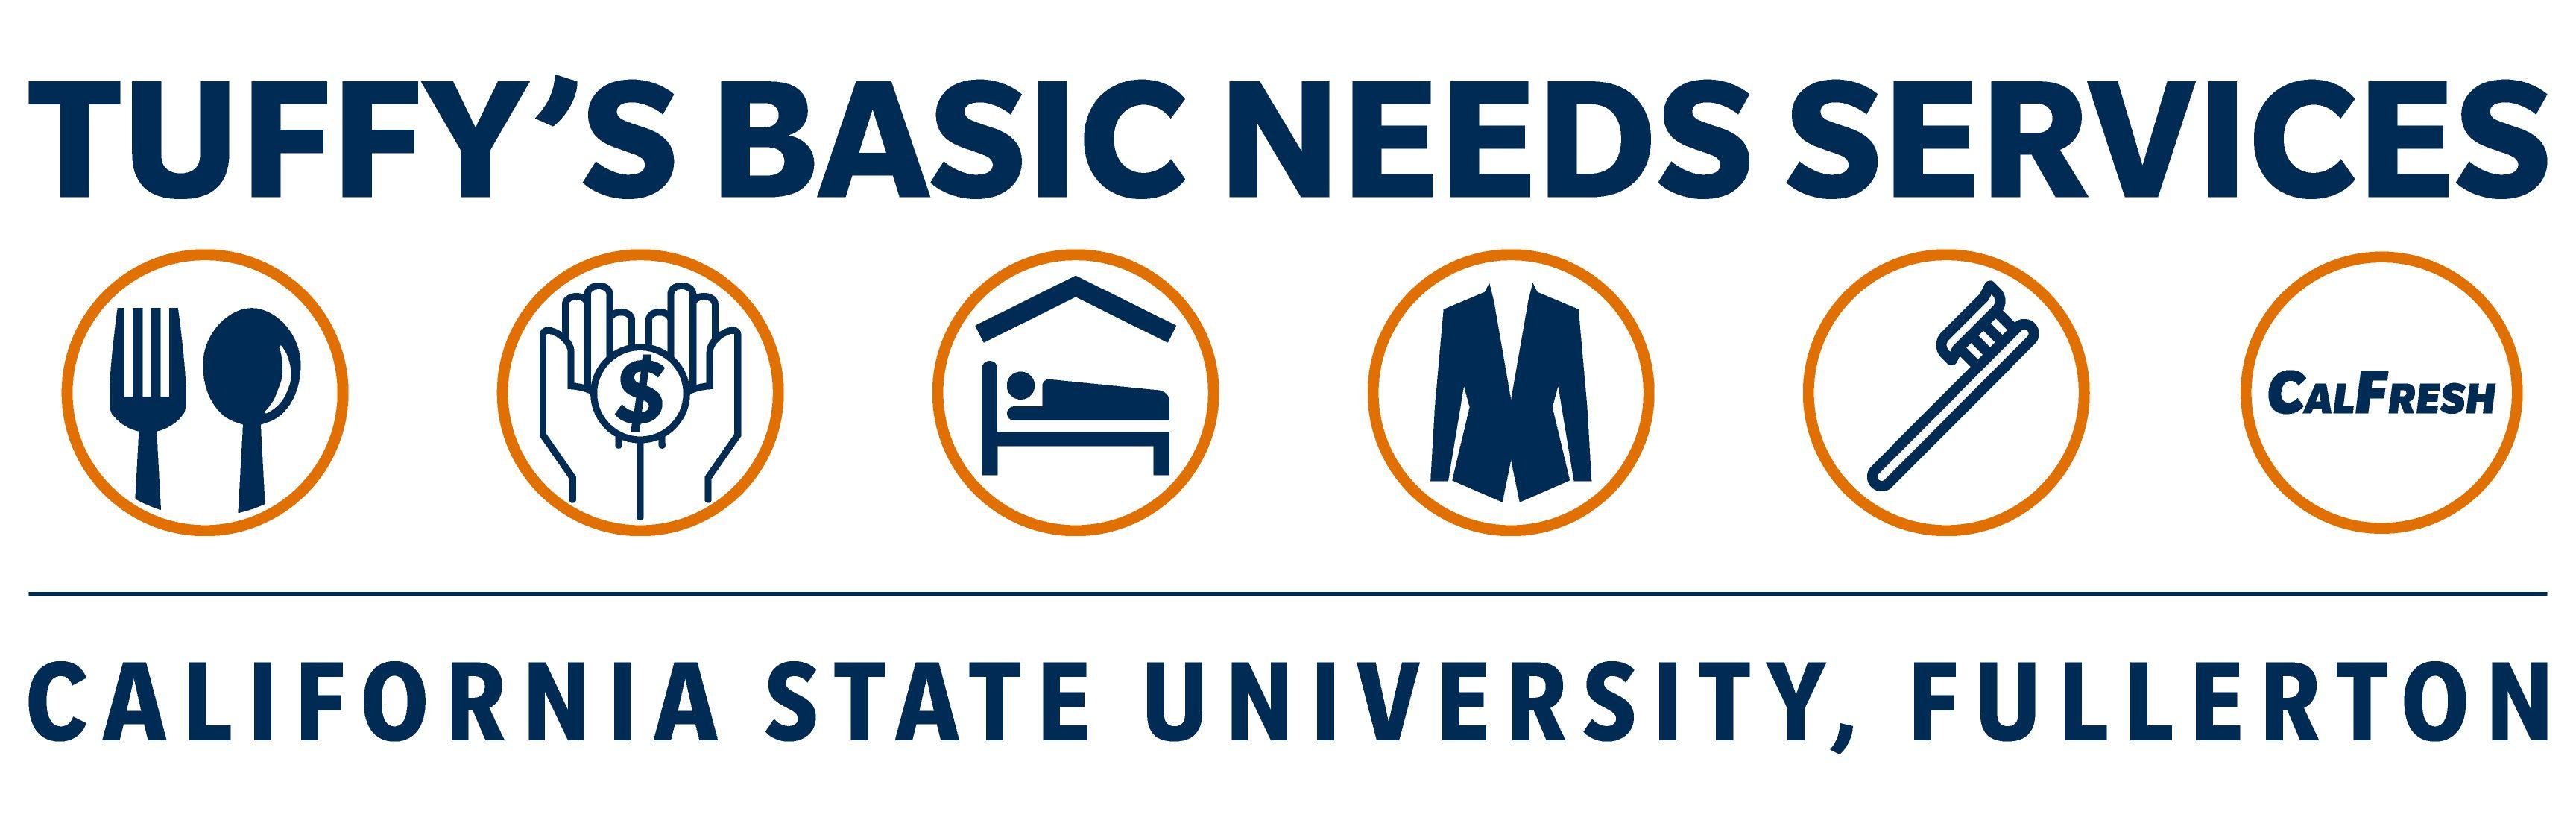 Tuffy's Logo - Tuffy's Basic Needs Services - Dean of Students | CSUF